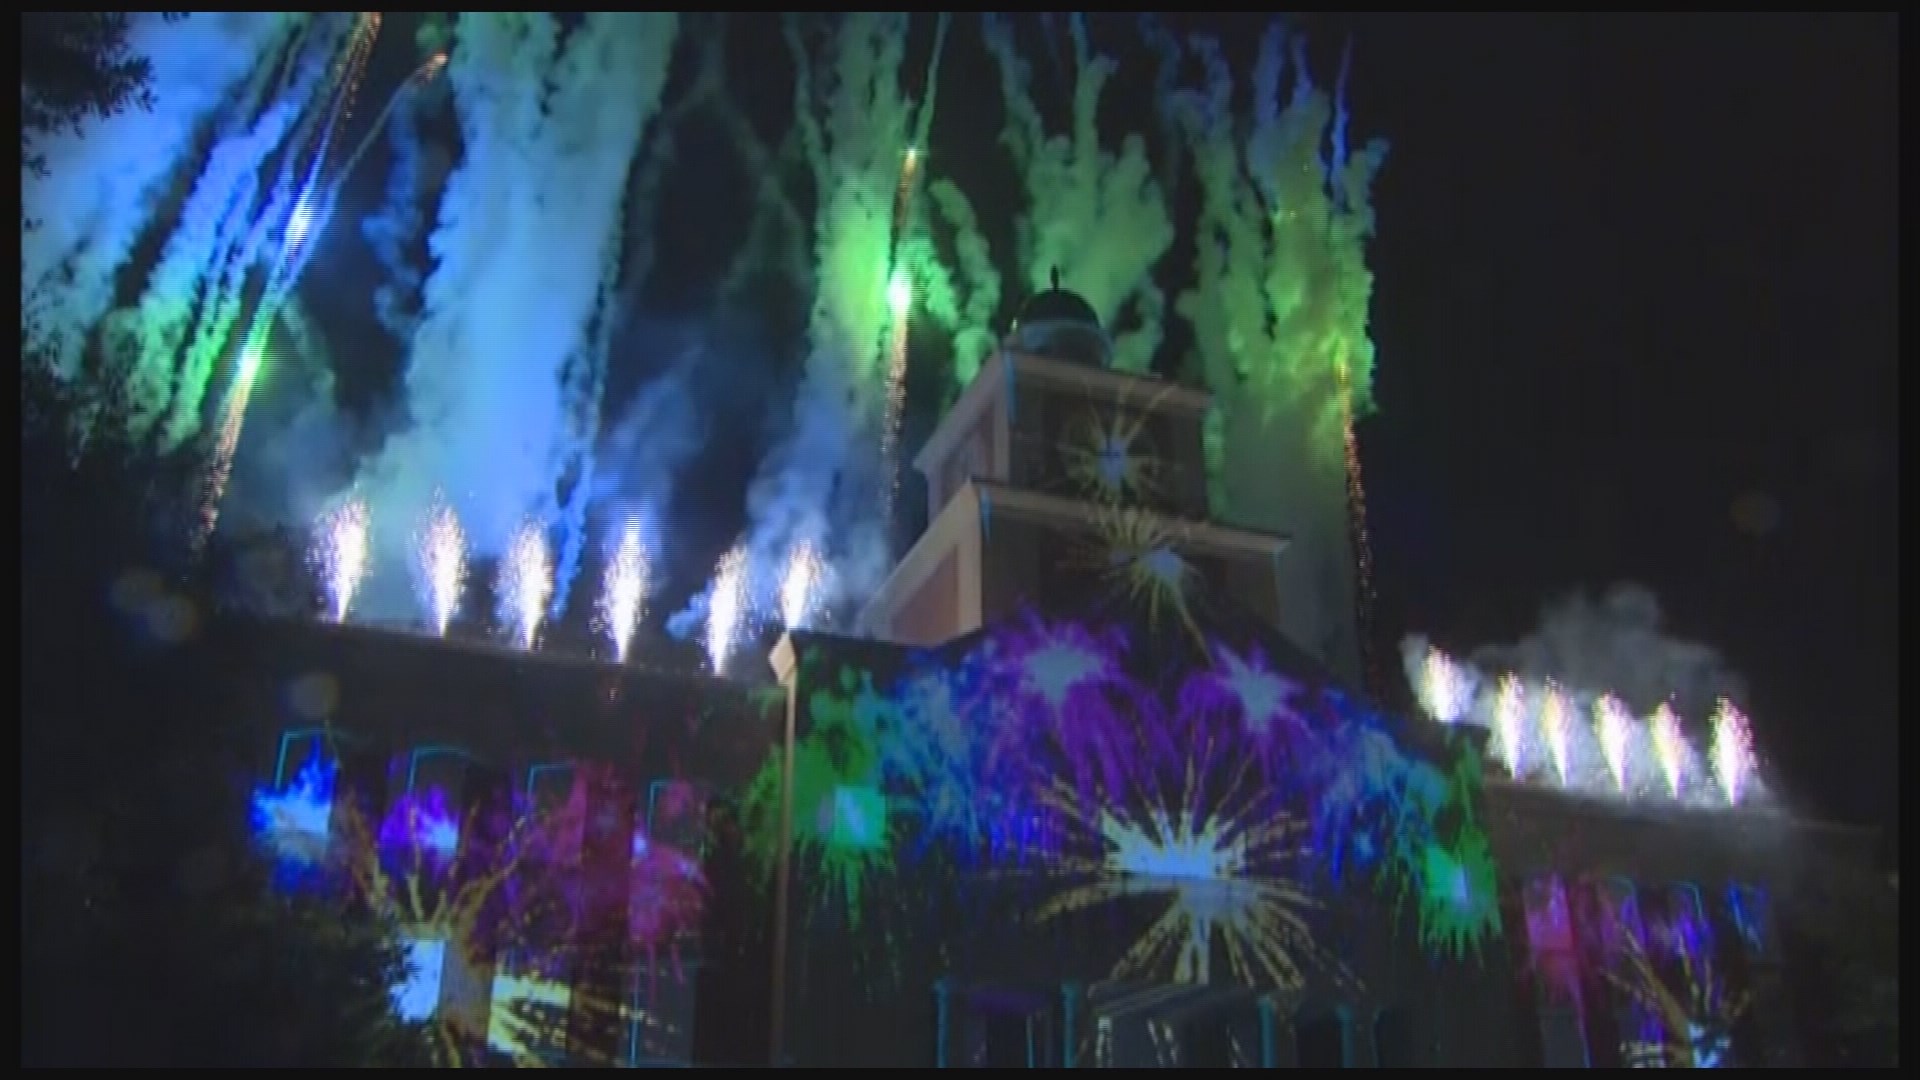 Thousands attend Sugar Land's New Year's Eve celebration